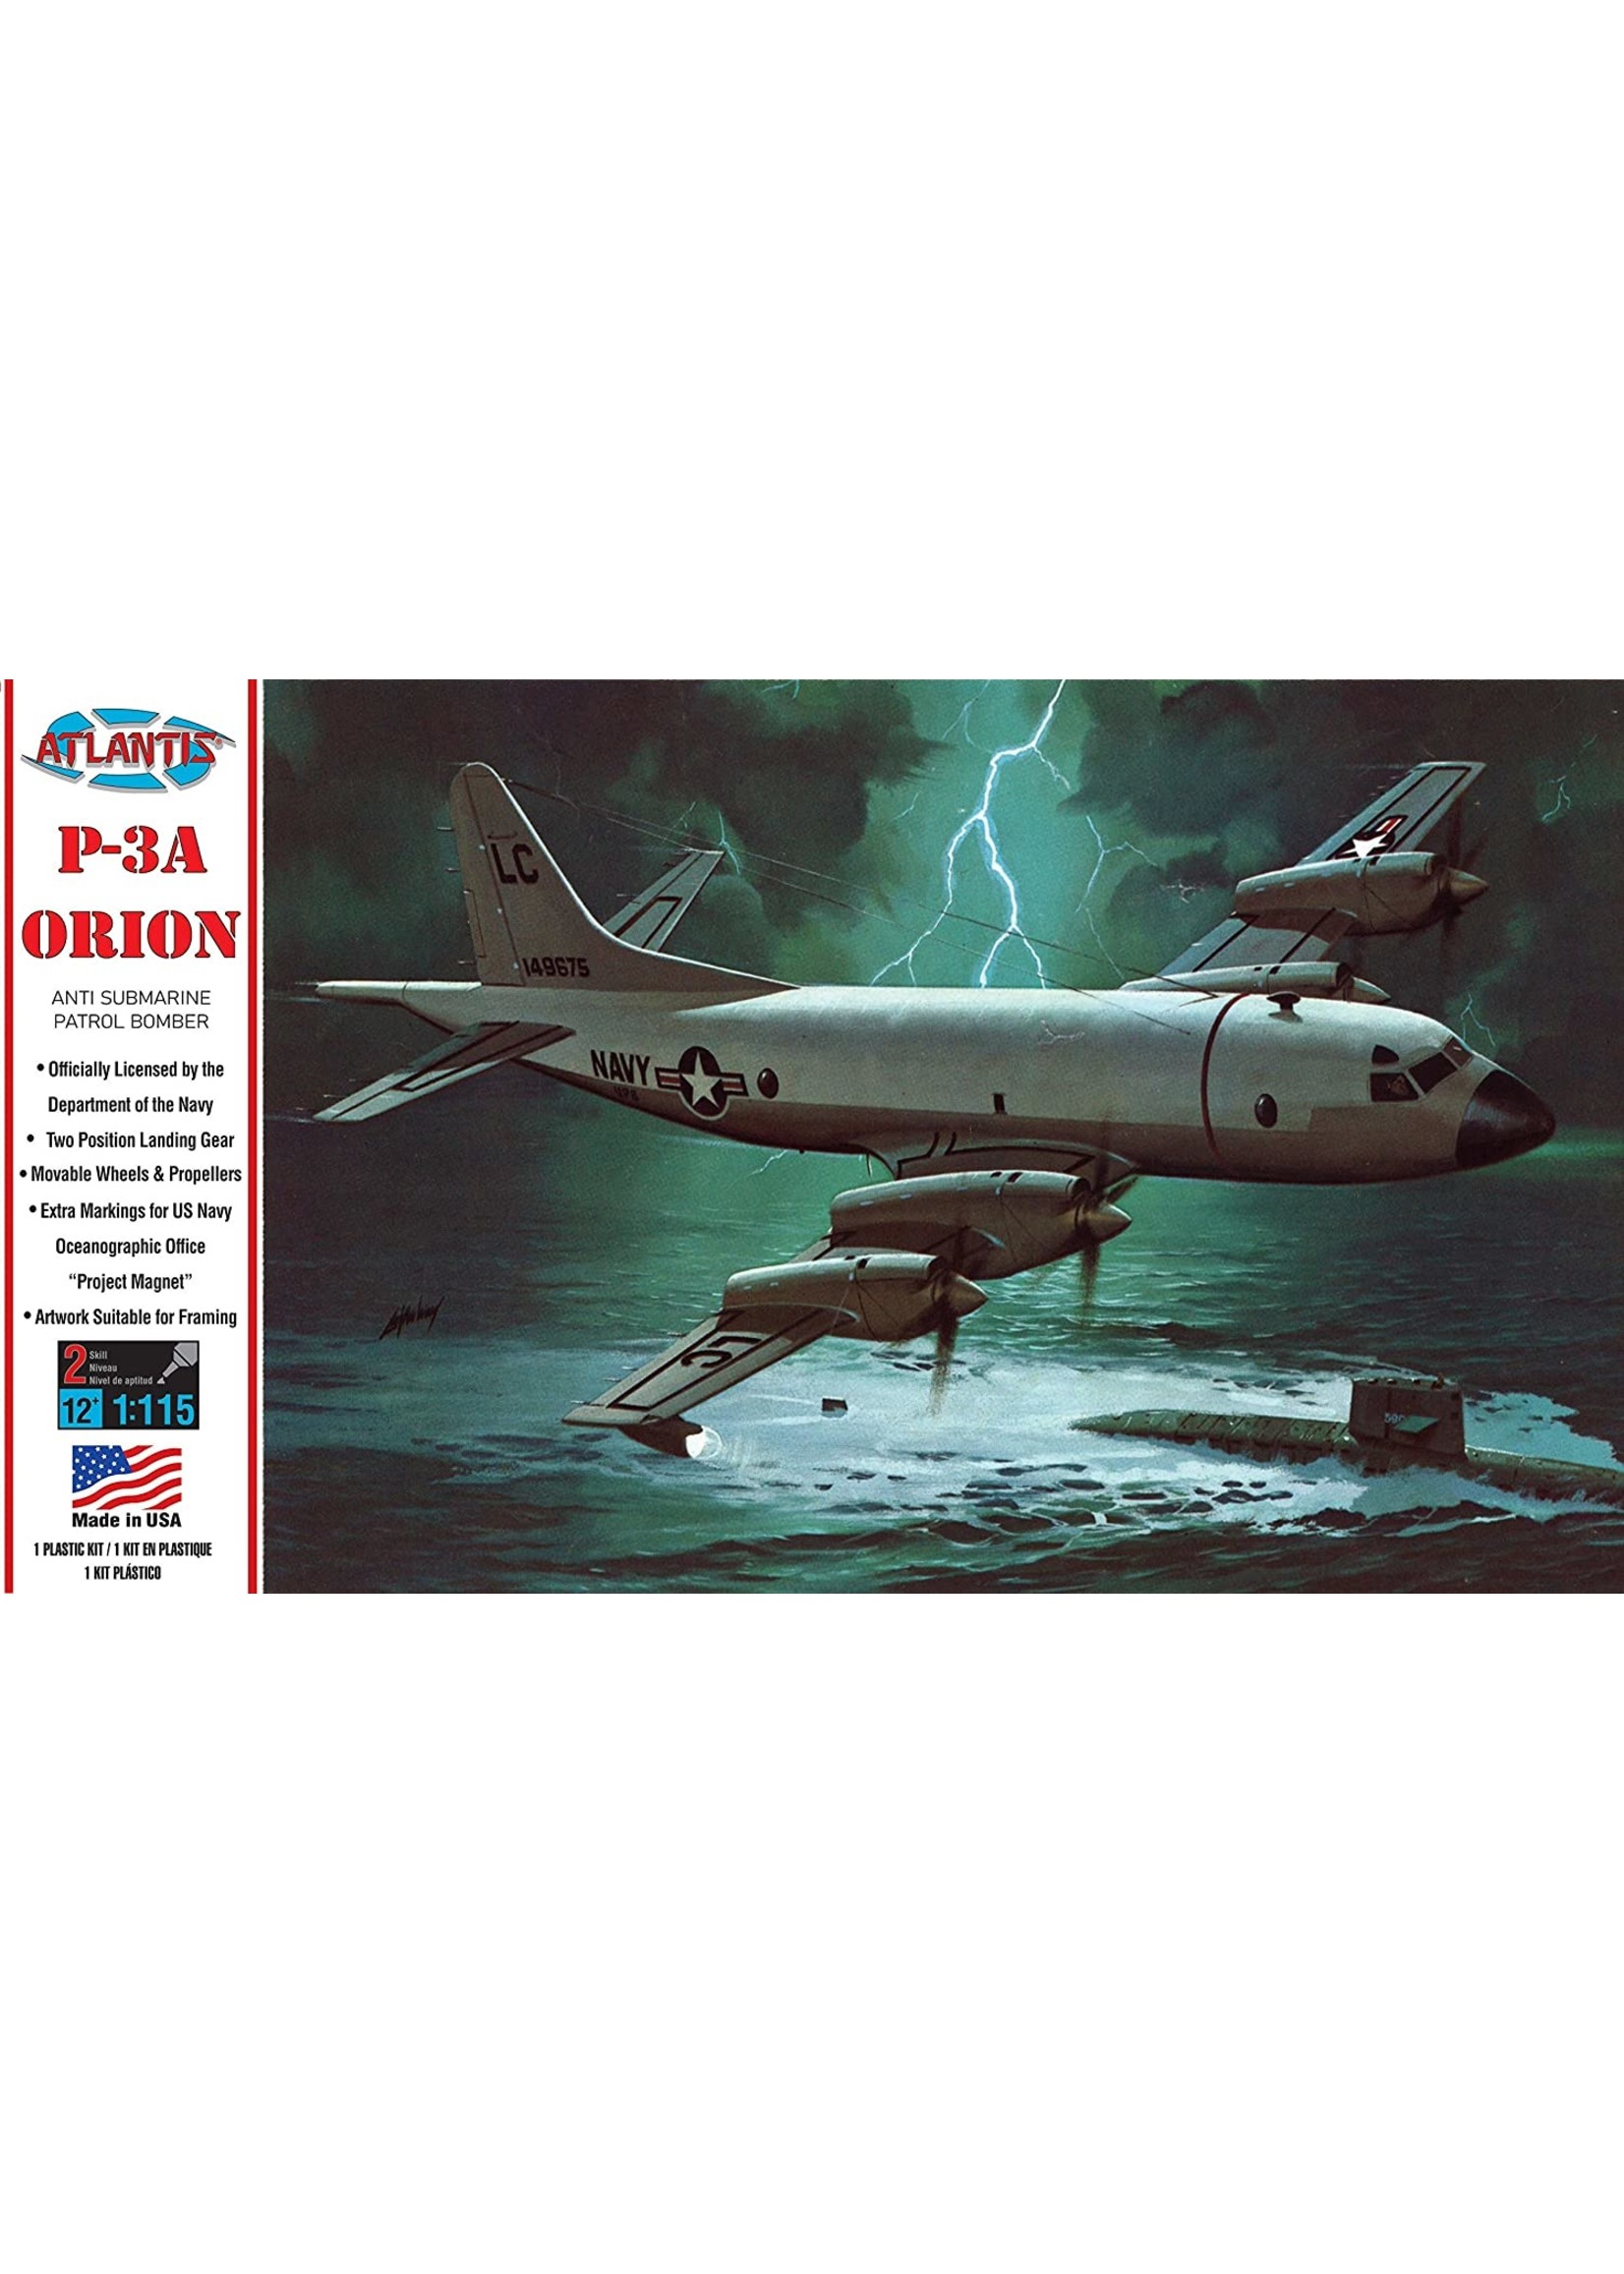 Atlantis 1/115 P3A Orion with Swivel Stand